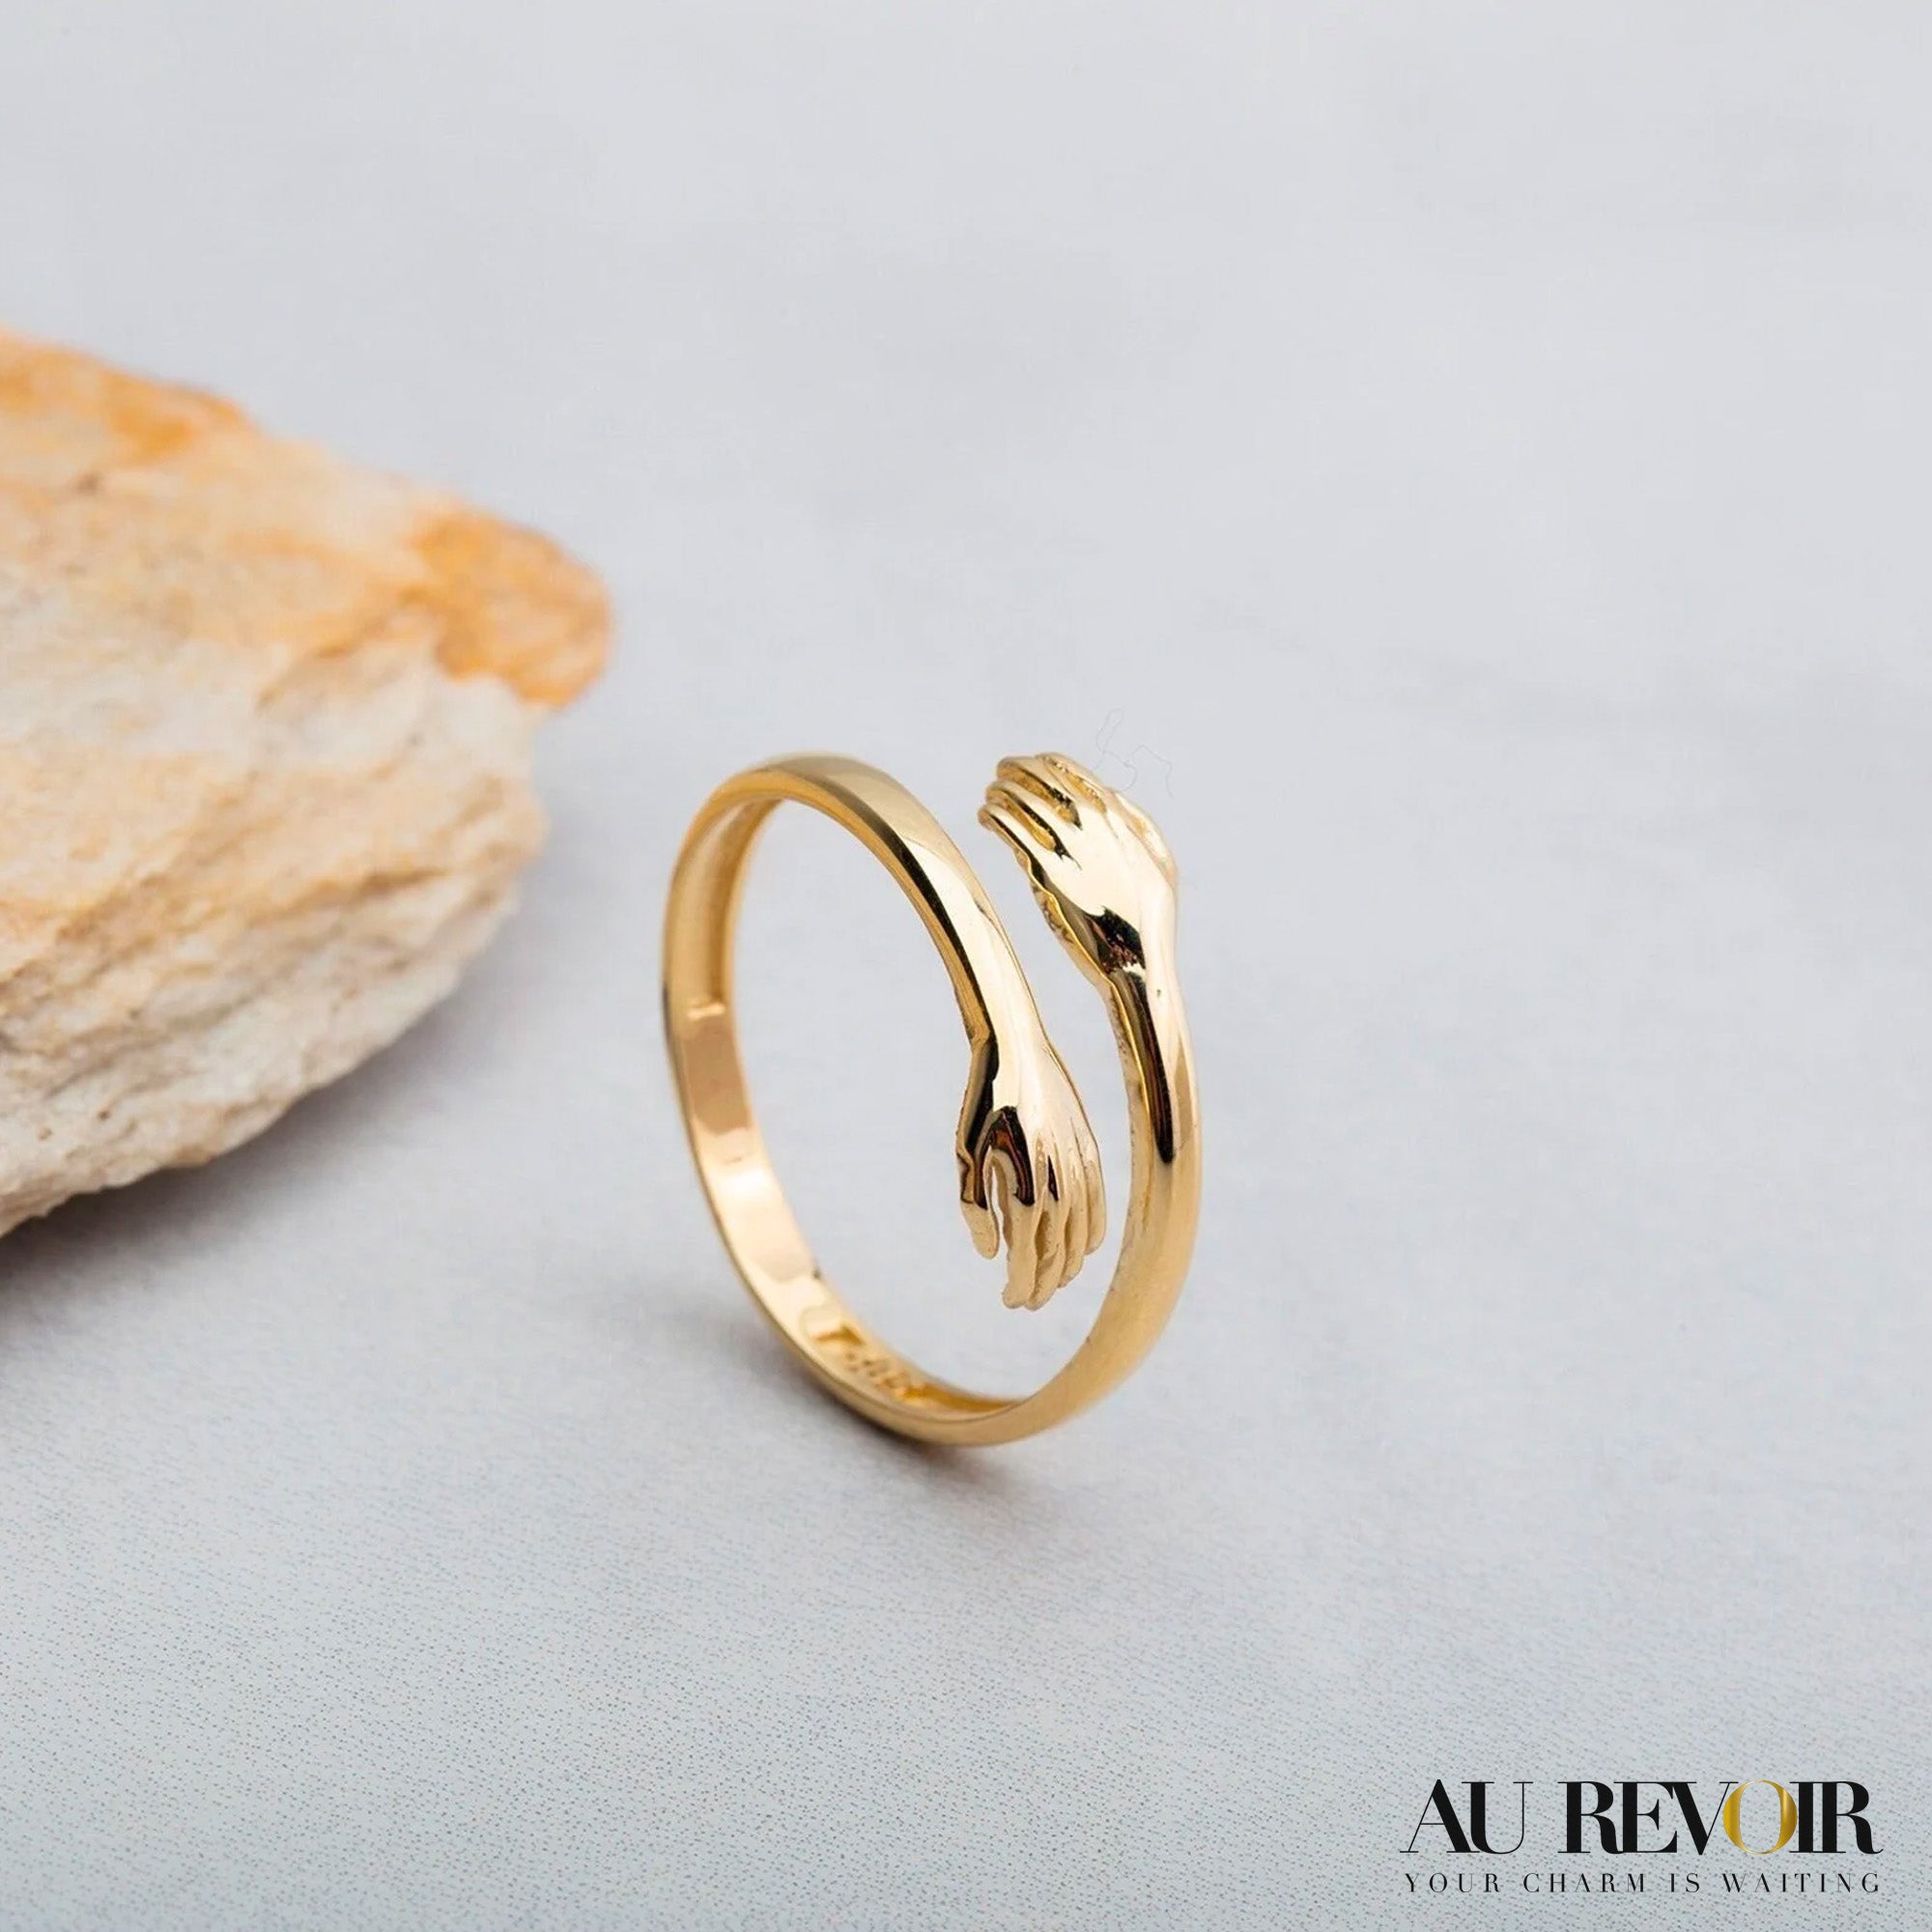 New Design Women Flower Latest Gold Finger Ring Designs,Large Big Size Open  Rings,Knuckle Ring Midi Fashion By Yiwu Dongrong Jewelry Co., Ltd.,